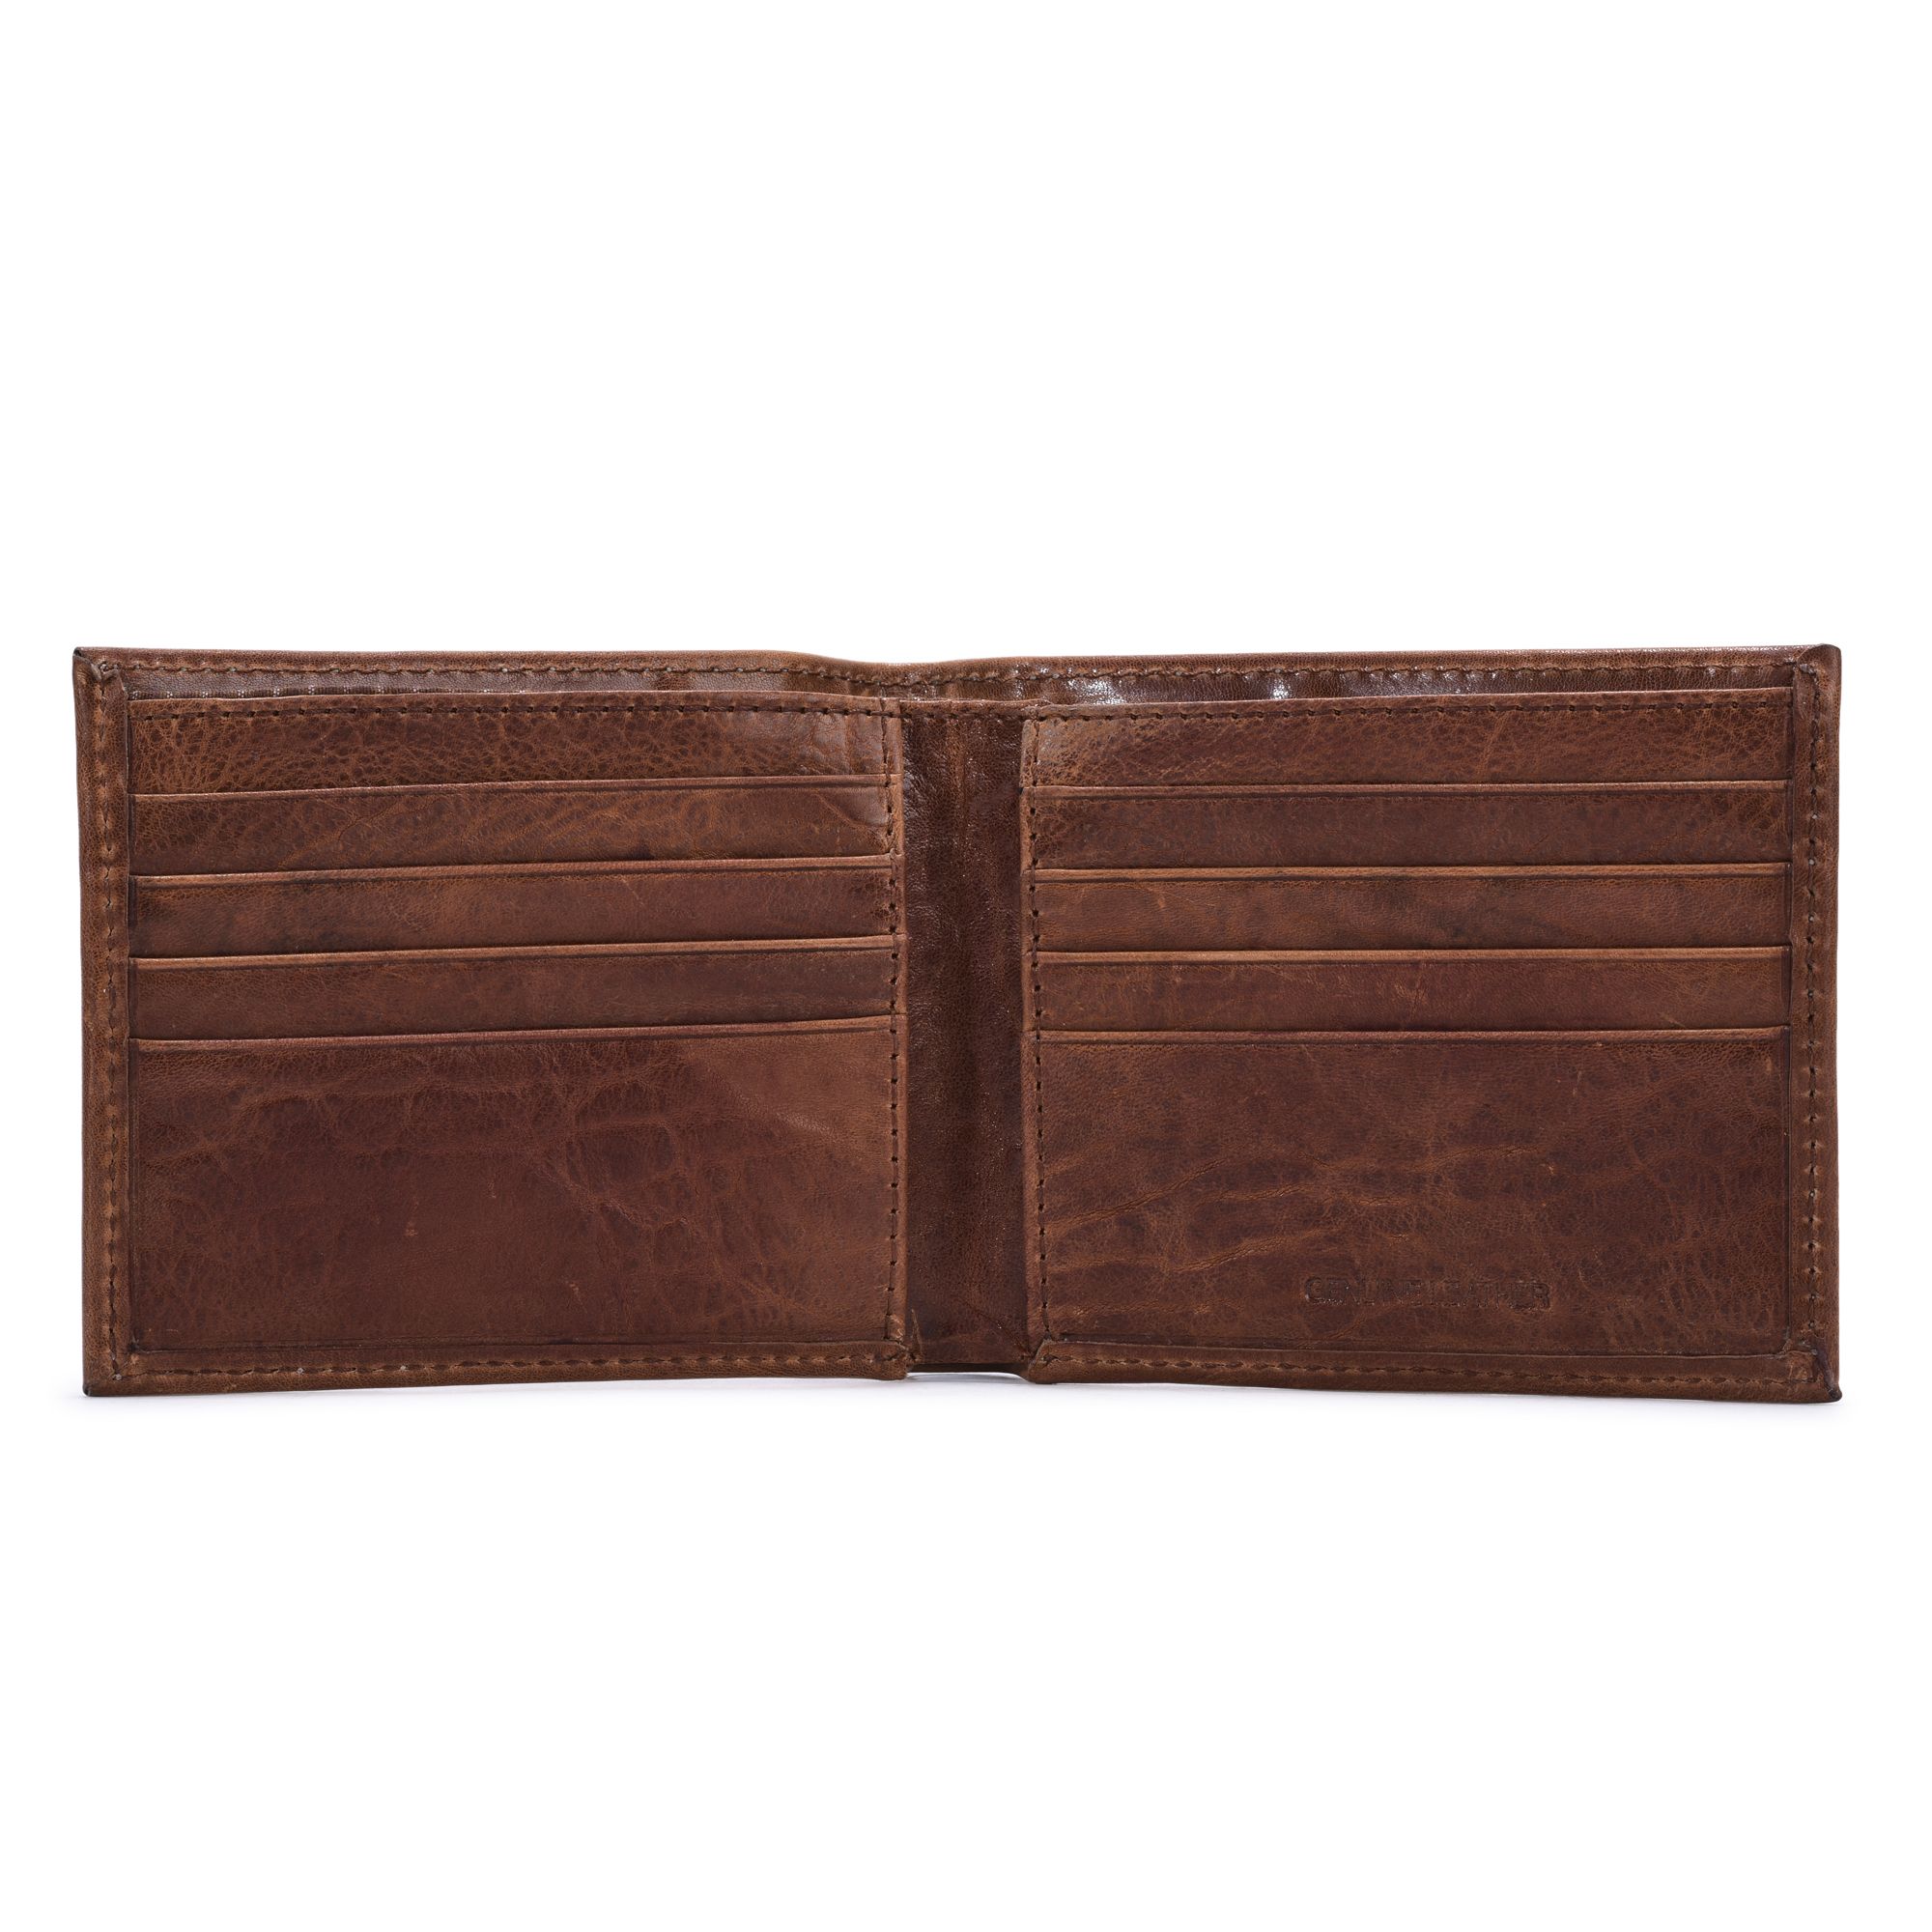 Tan bifold leather wallet for men